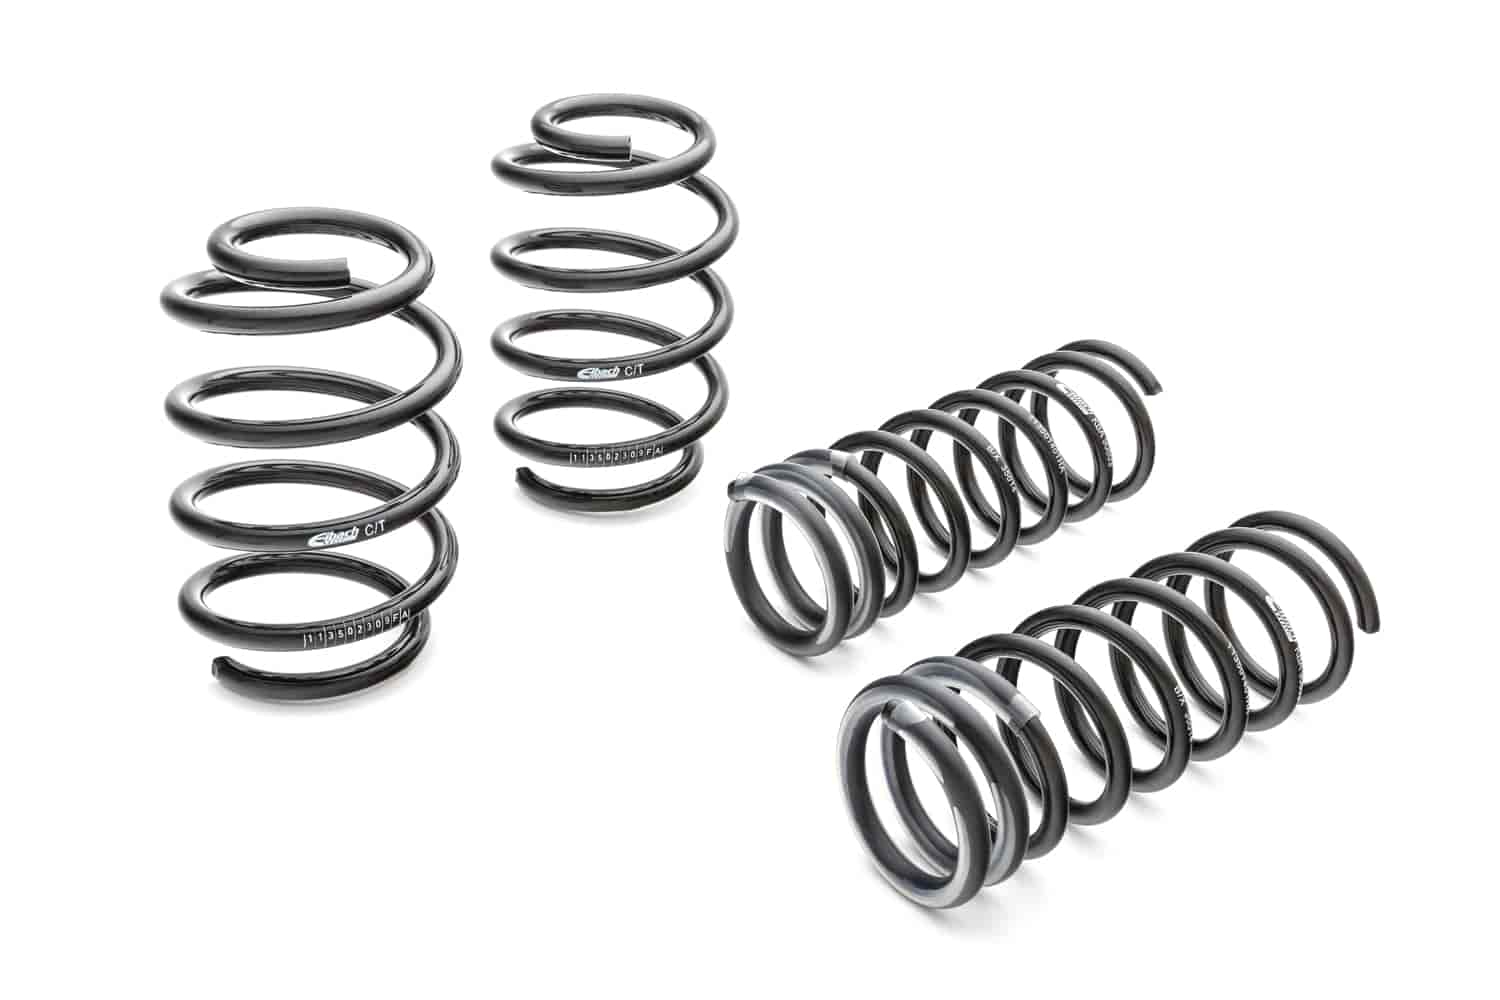 3531.140 Pro-Kit Lowering Springs 1994-1998 Mustang V6 convertible - 1.500 in. Front/Rear Drop